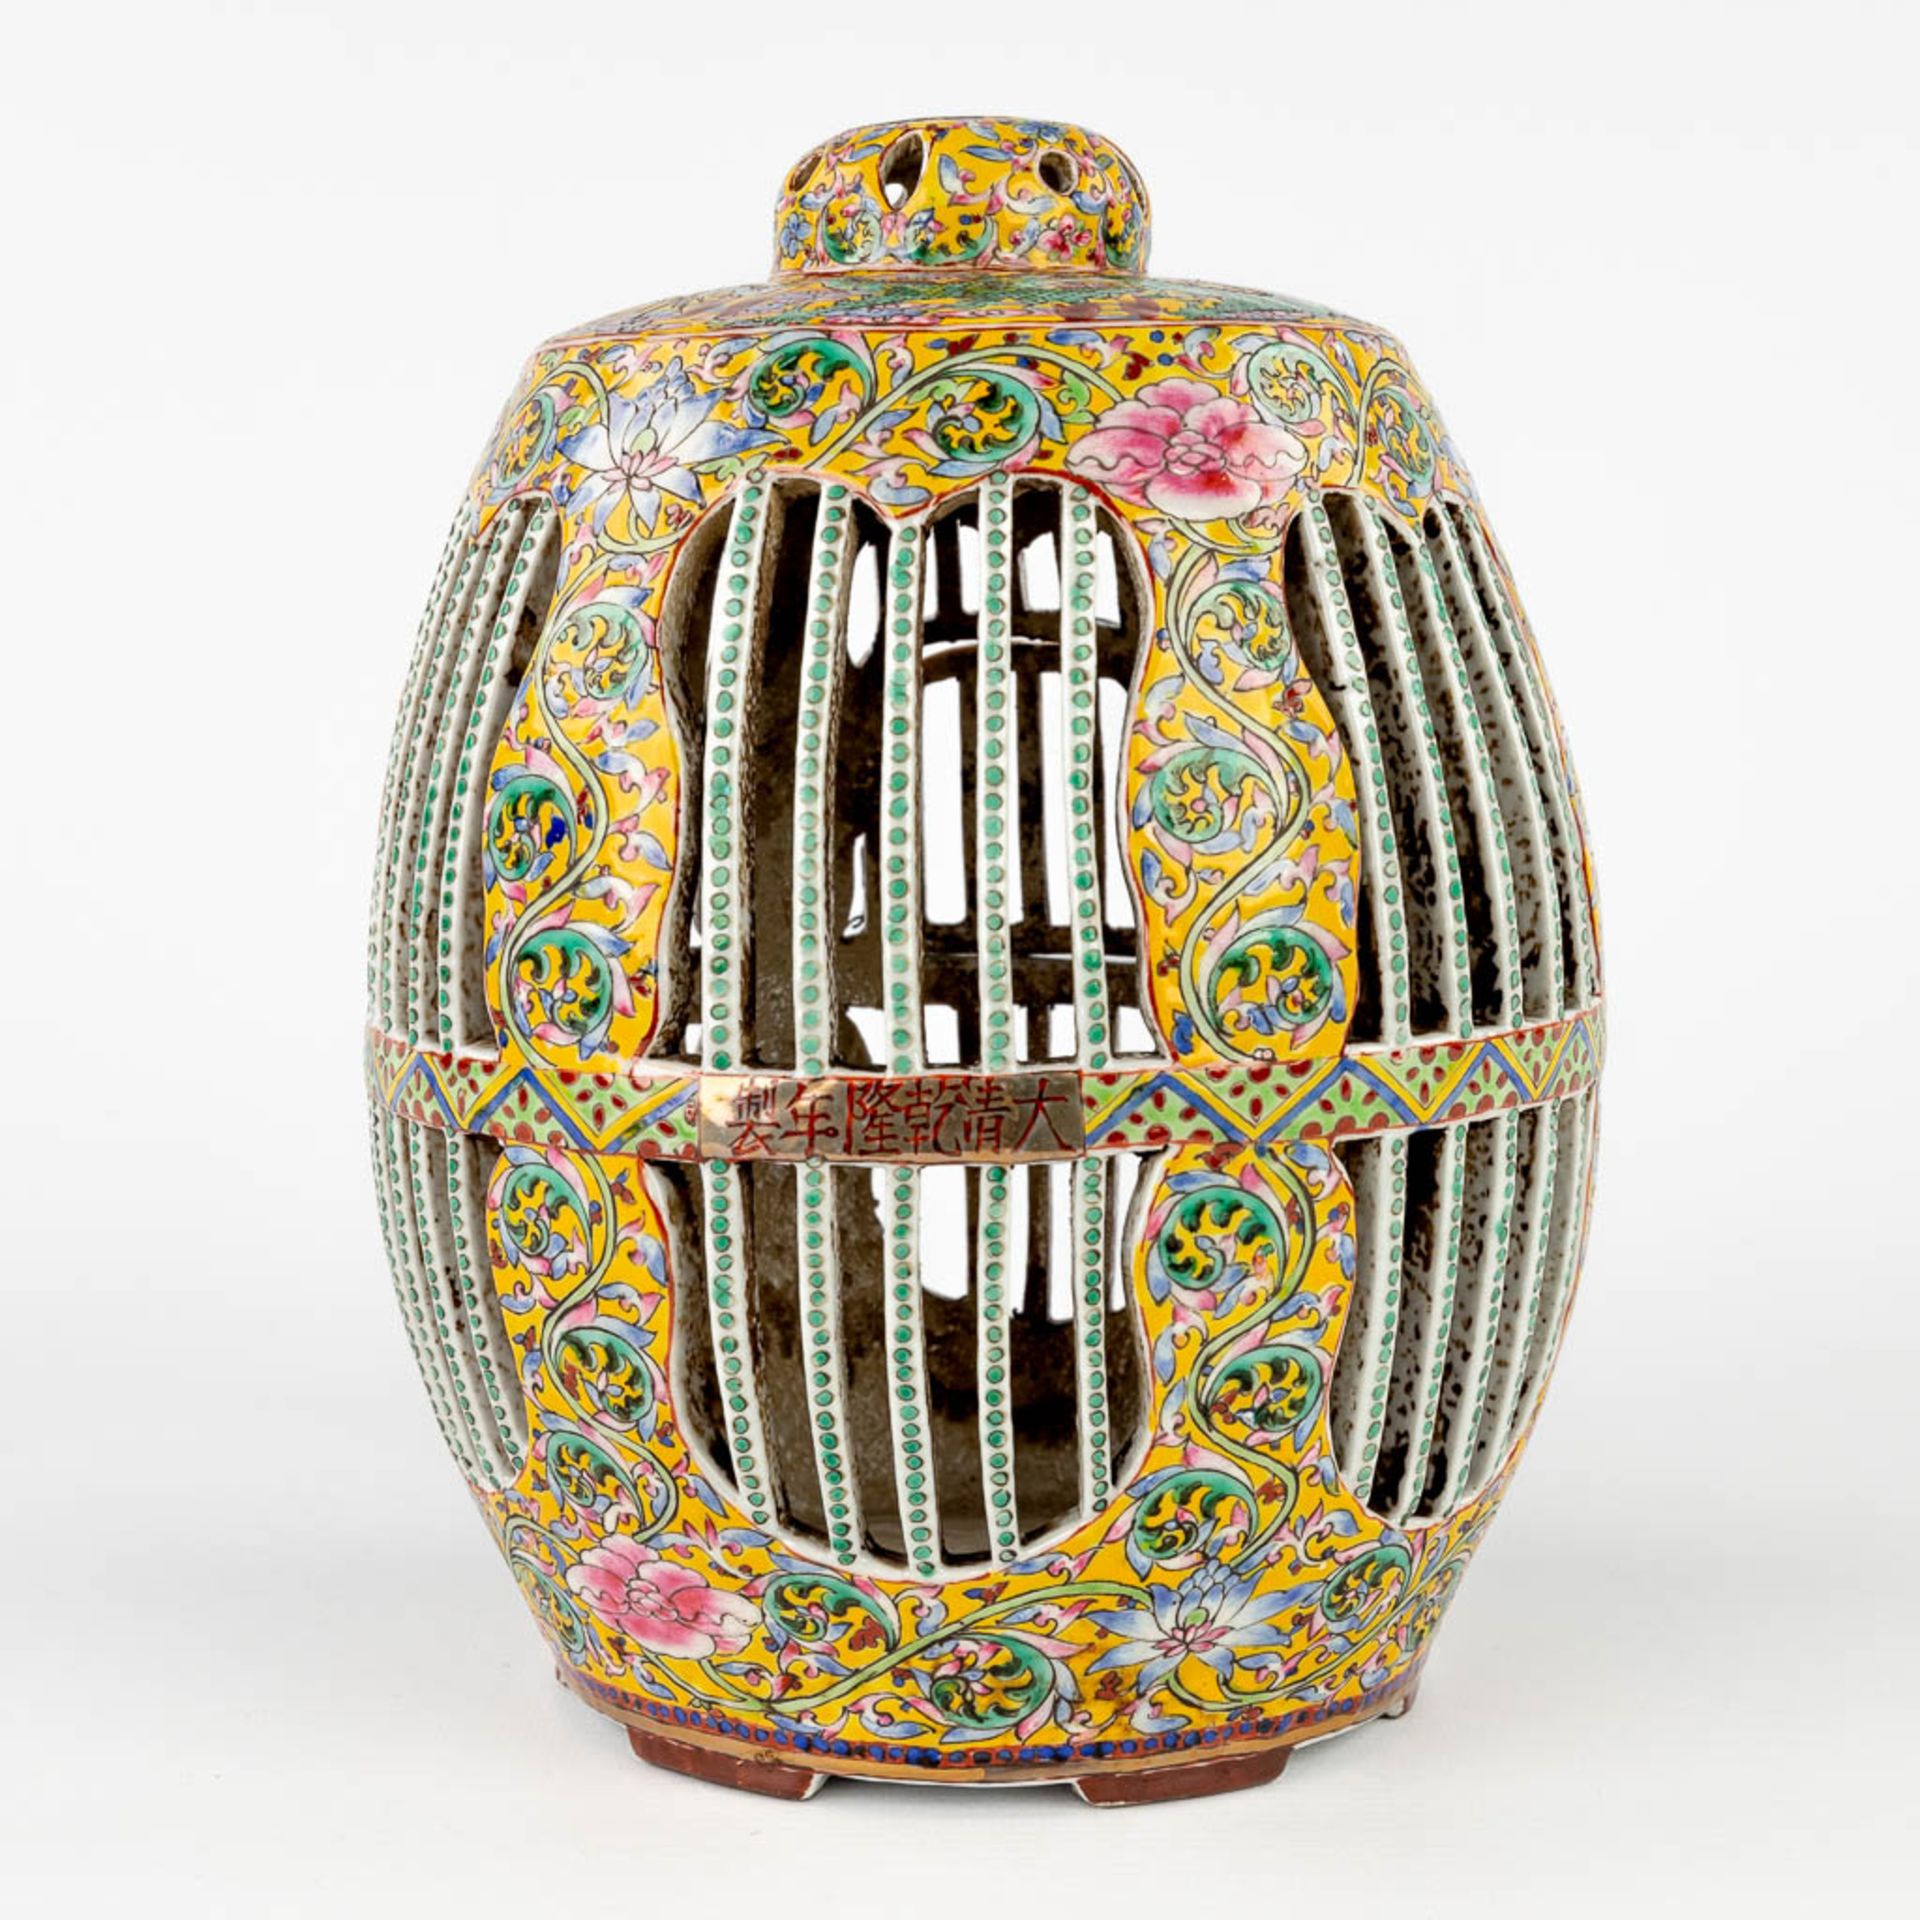 A Chinese porcelain 'Bird Cage', Famille Rose, Qianlong Mark. 20th C. (H:25 x D:19 cm) - Image 6 of 12